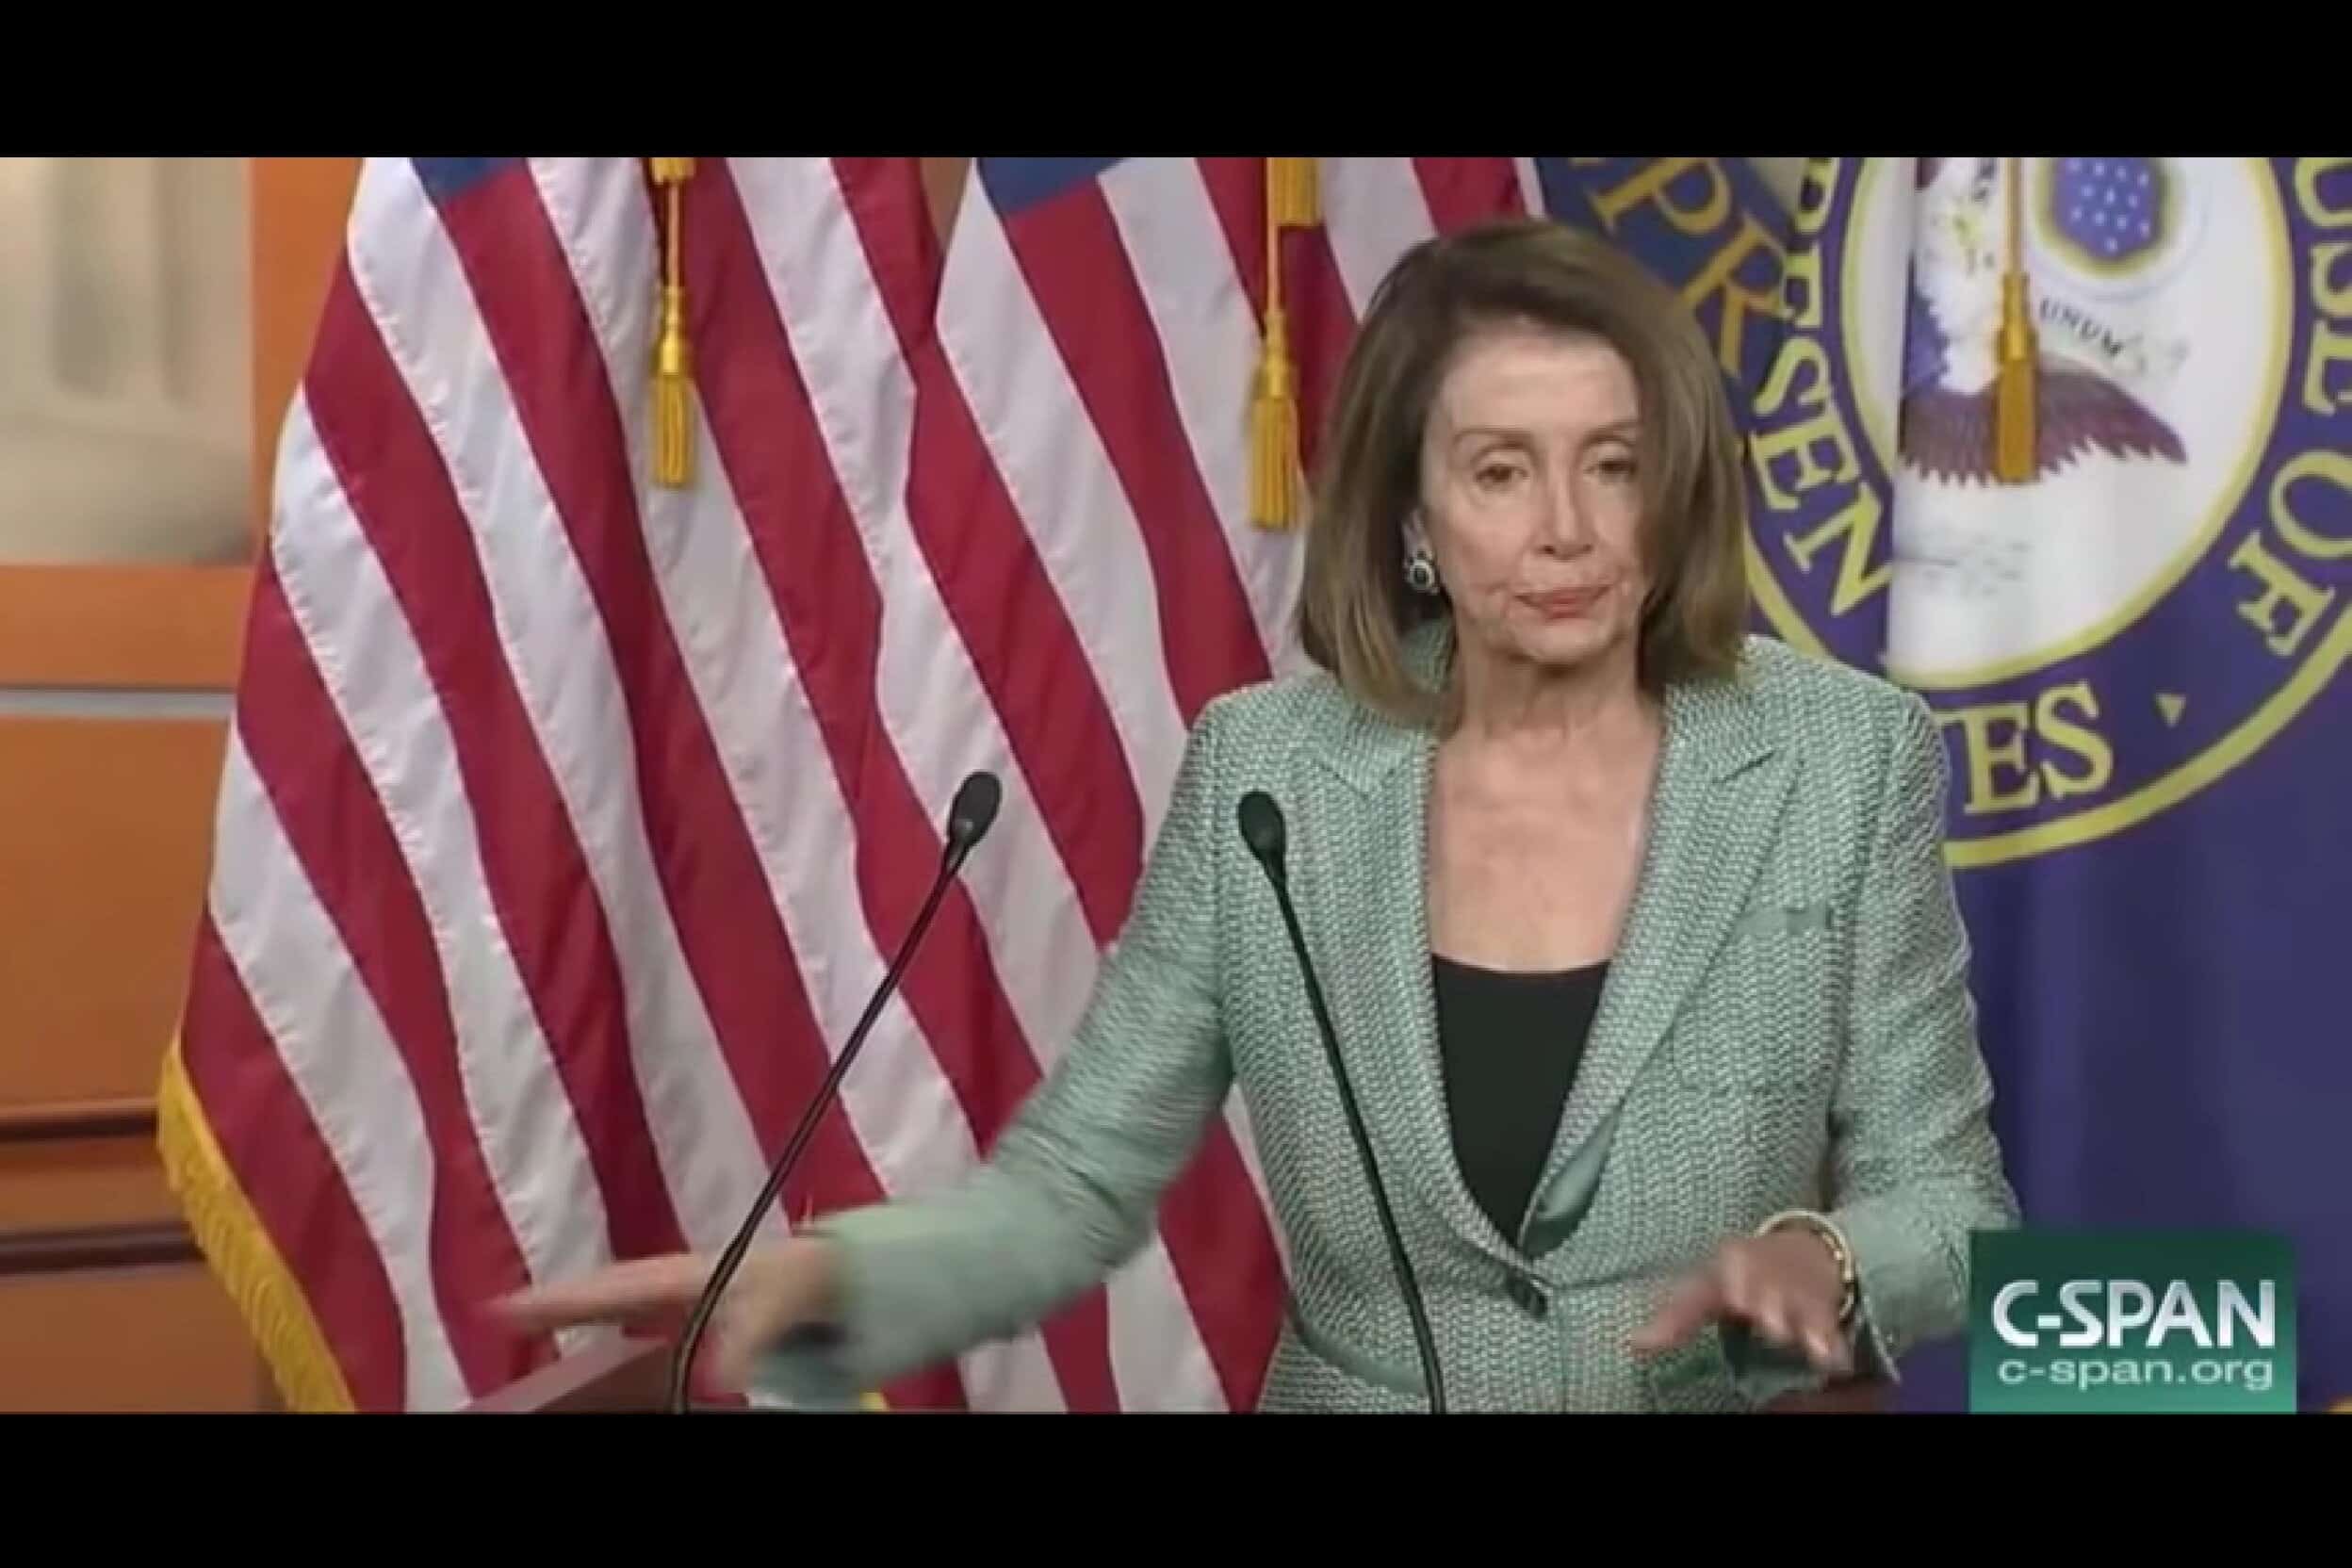 Dems Lower Voting Age To 16 In Cities – Pelosi Once Said: “It’s Important To Capture Kids While They’re In High School”